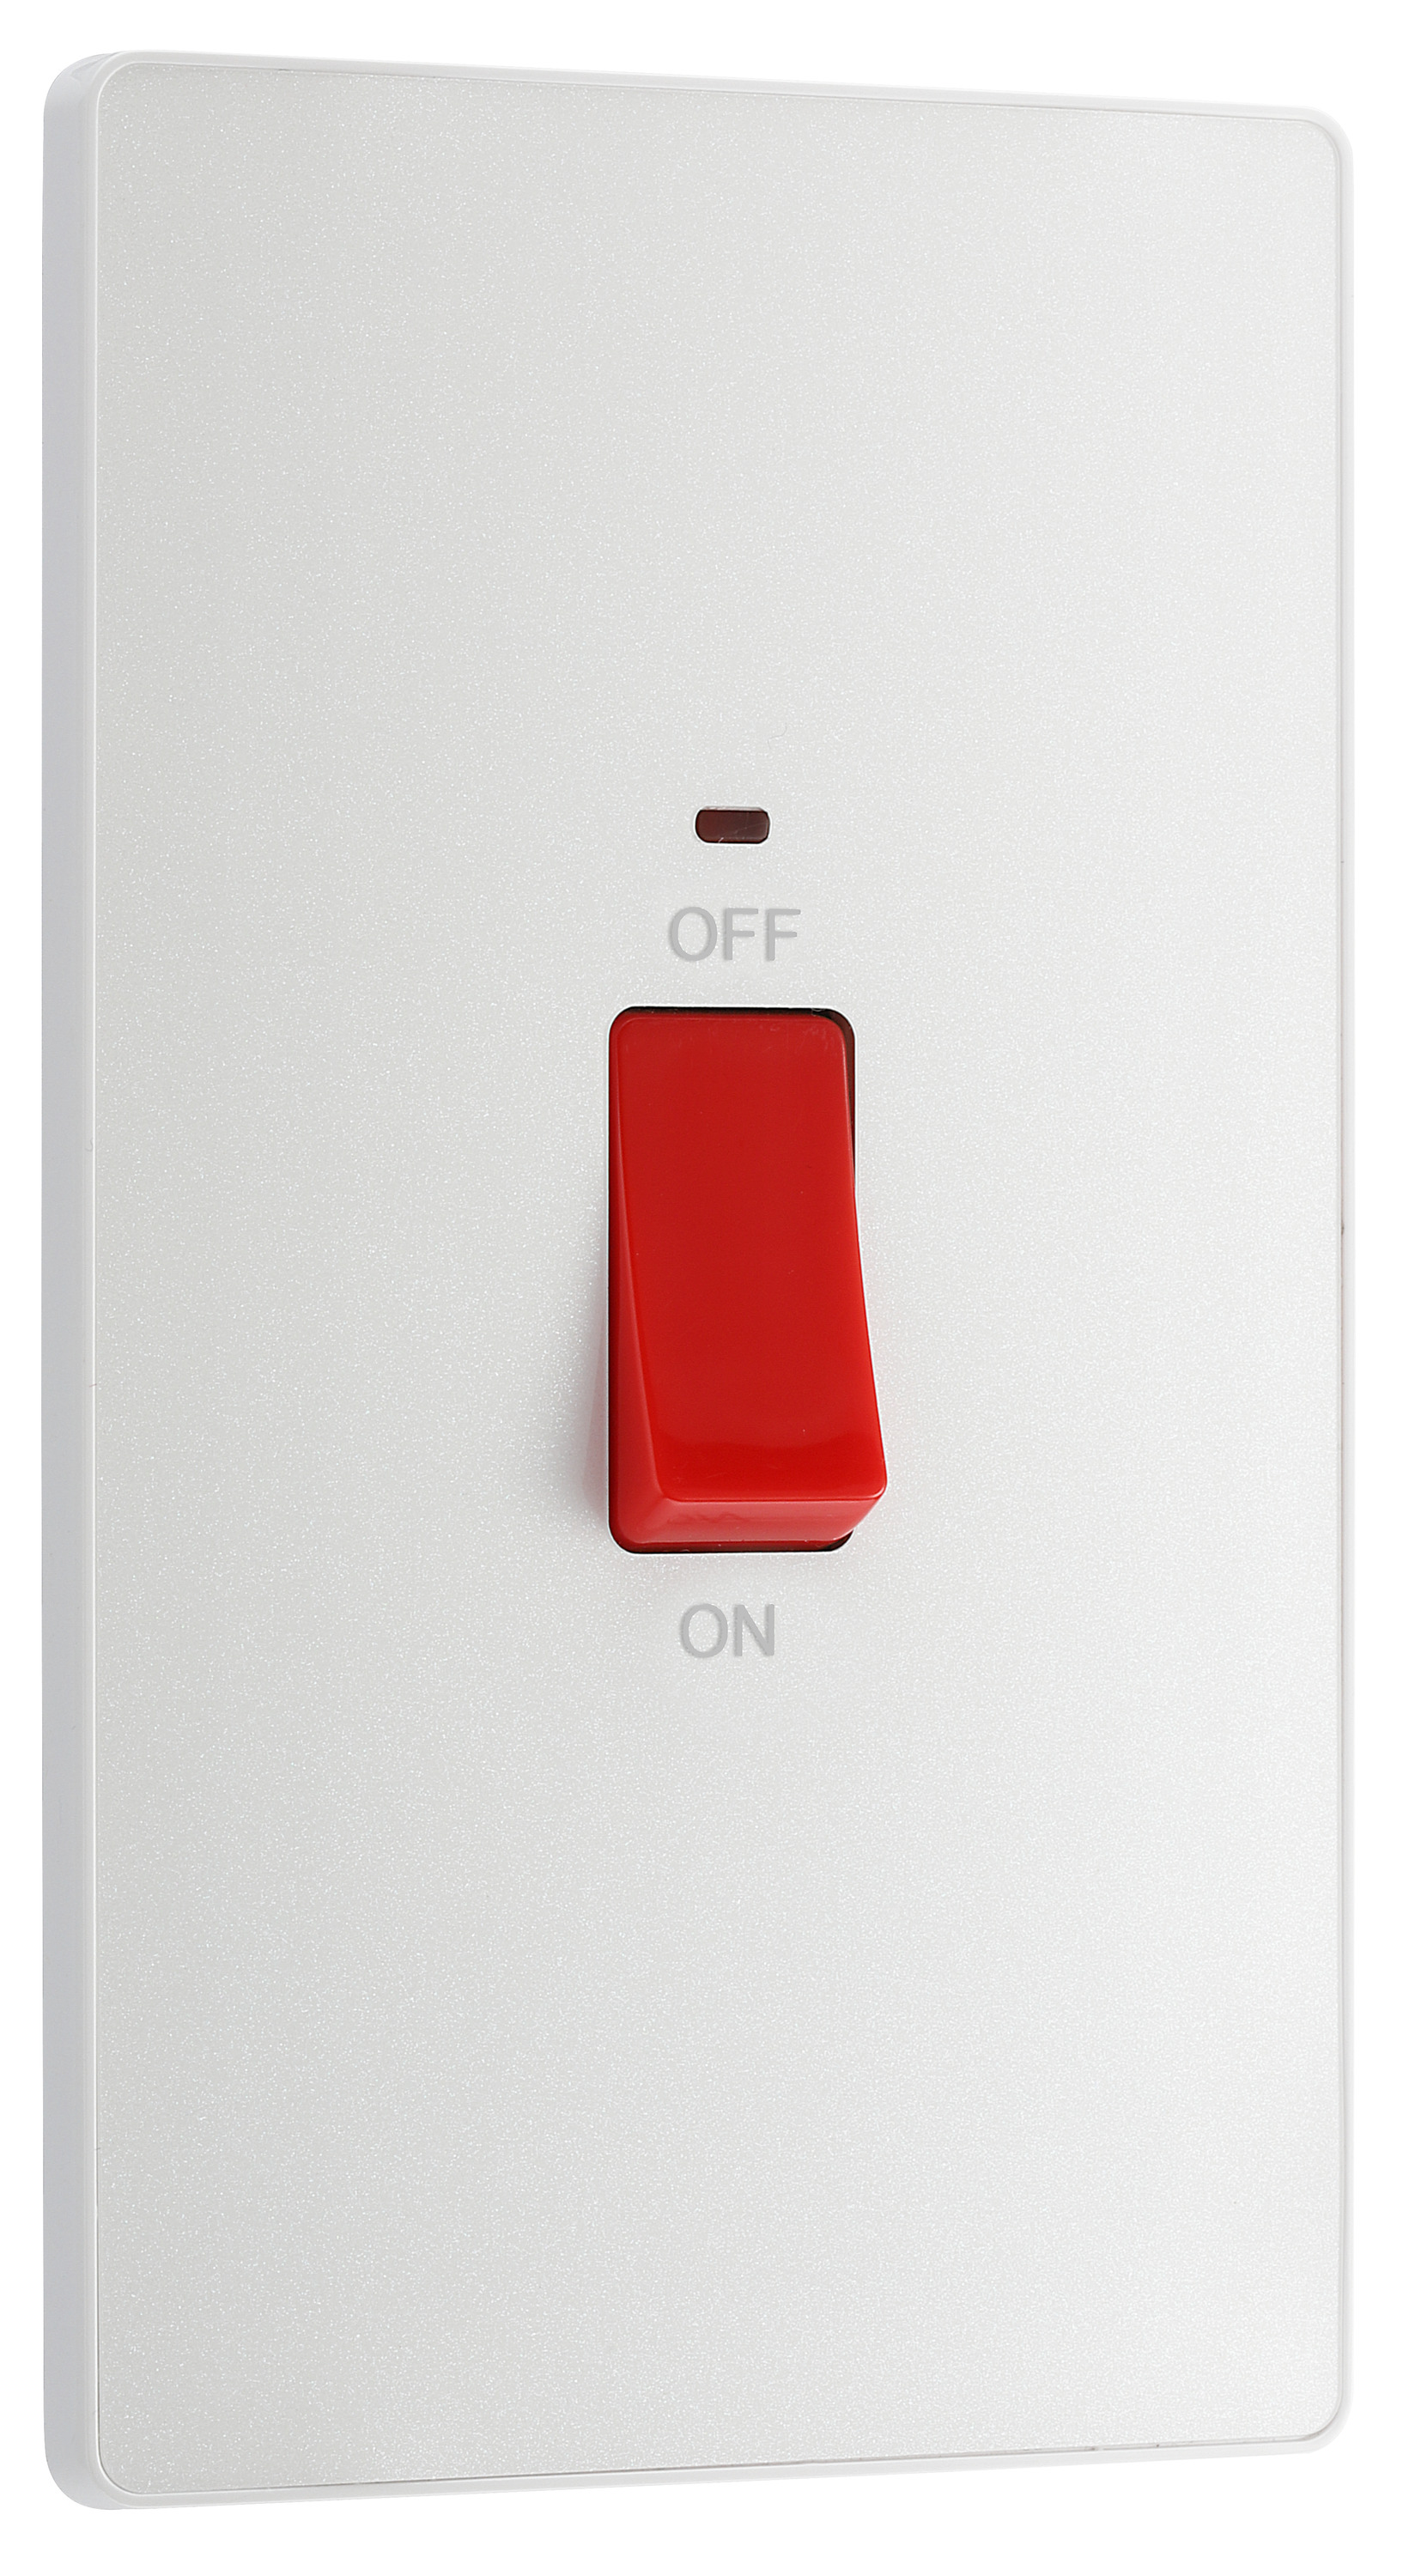 Image of BG Evolve Pearlescent White 45A Rectangular Cooker Control Unit Switch